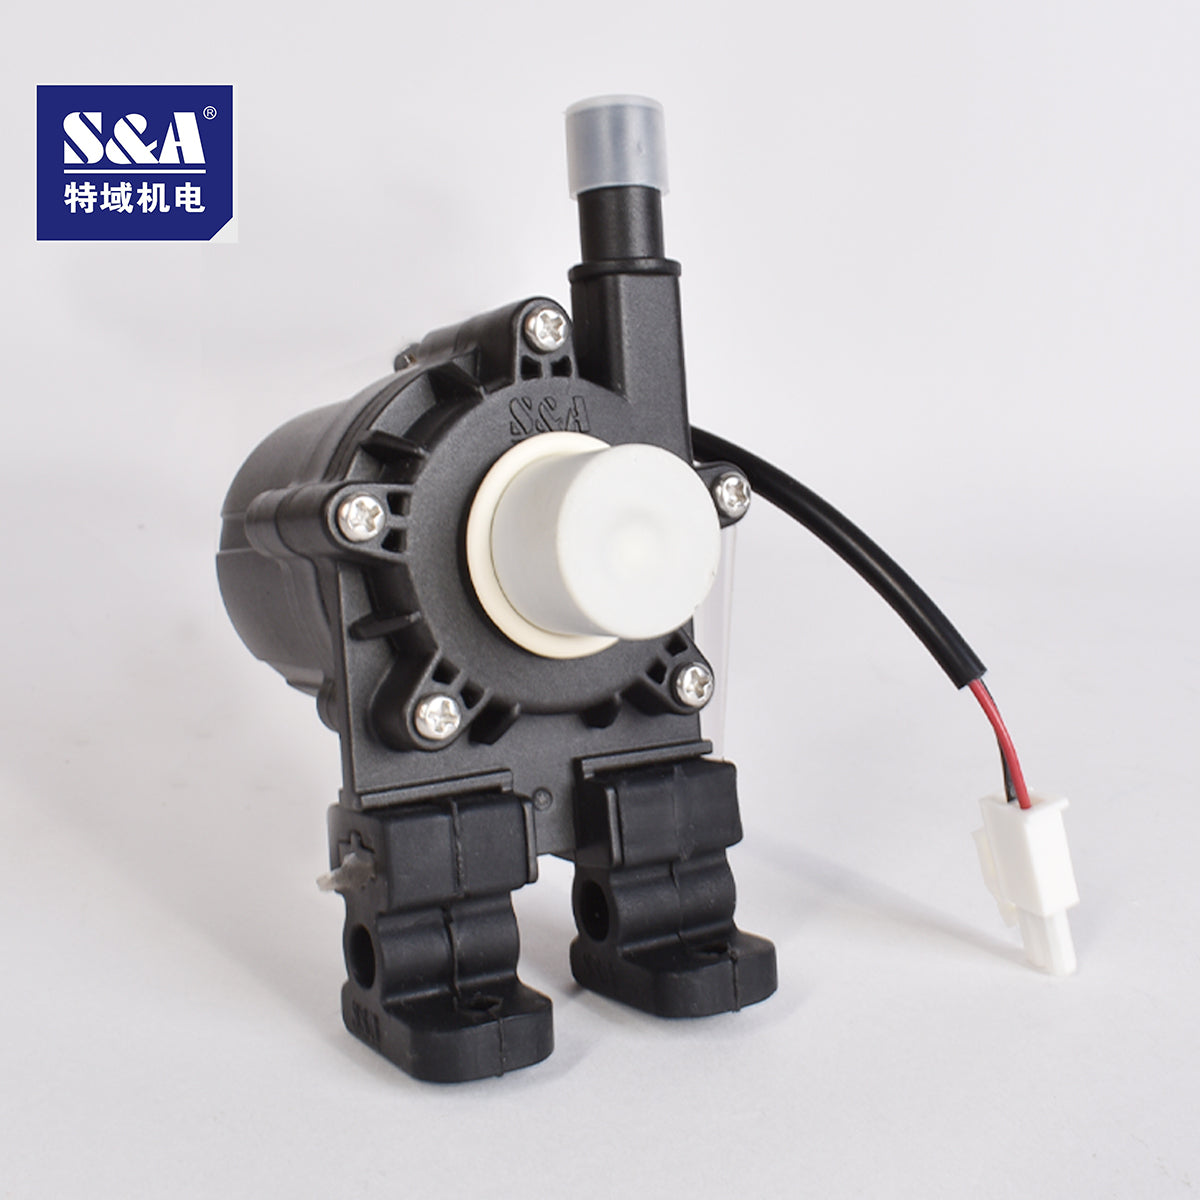 Startnow P2450 P2430 Water Pumps For S&A CW3000 AG/DG CW5000 AG/DG/AH/DH Industrial Water Chiller Pump P2402A